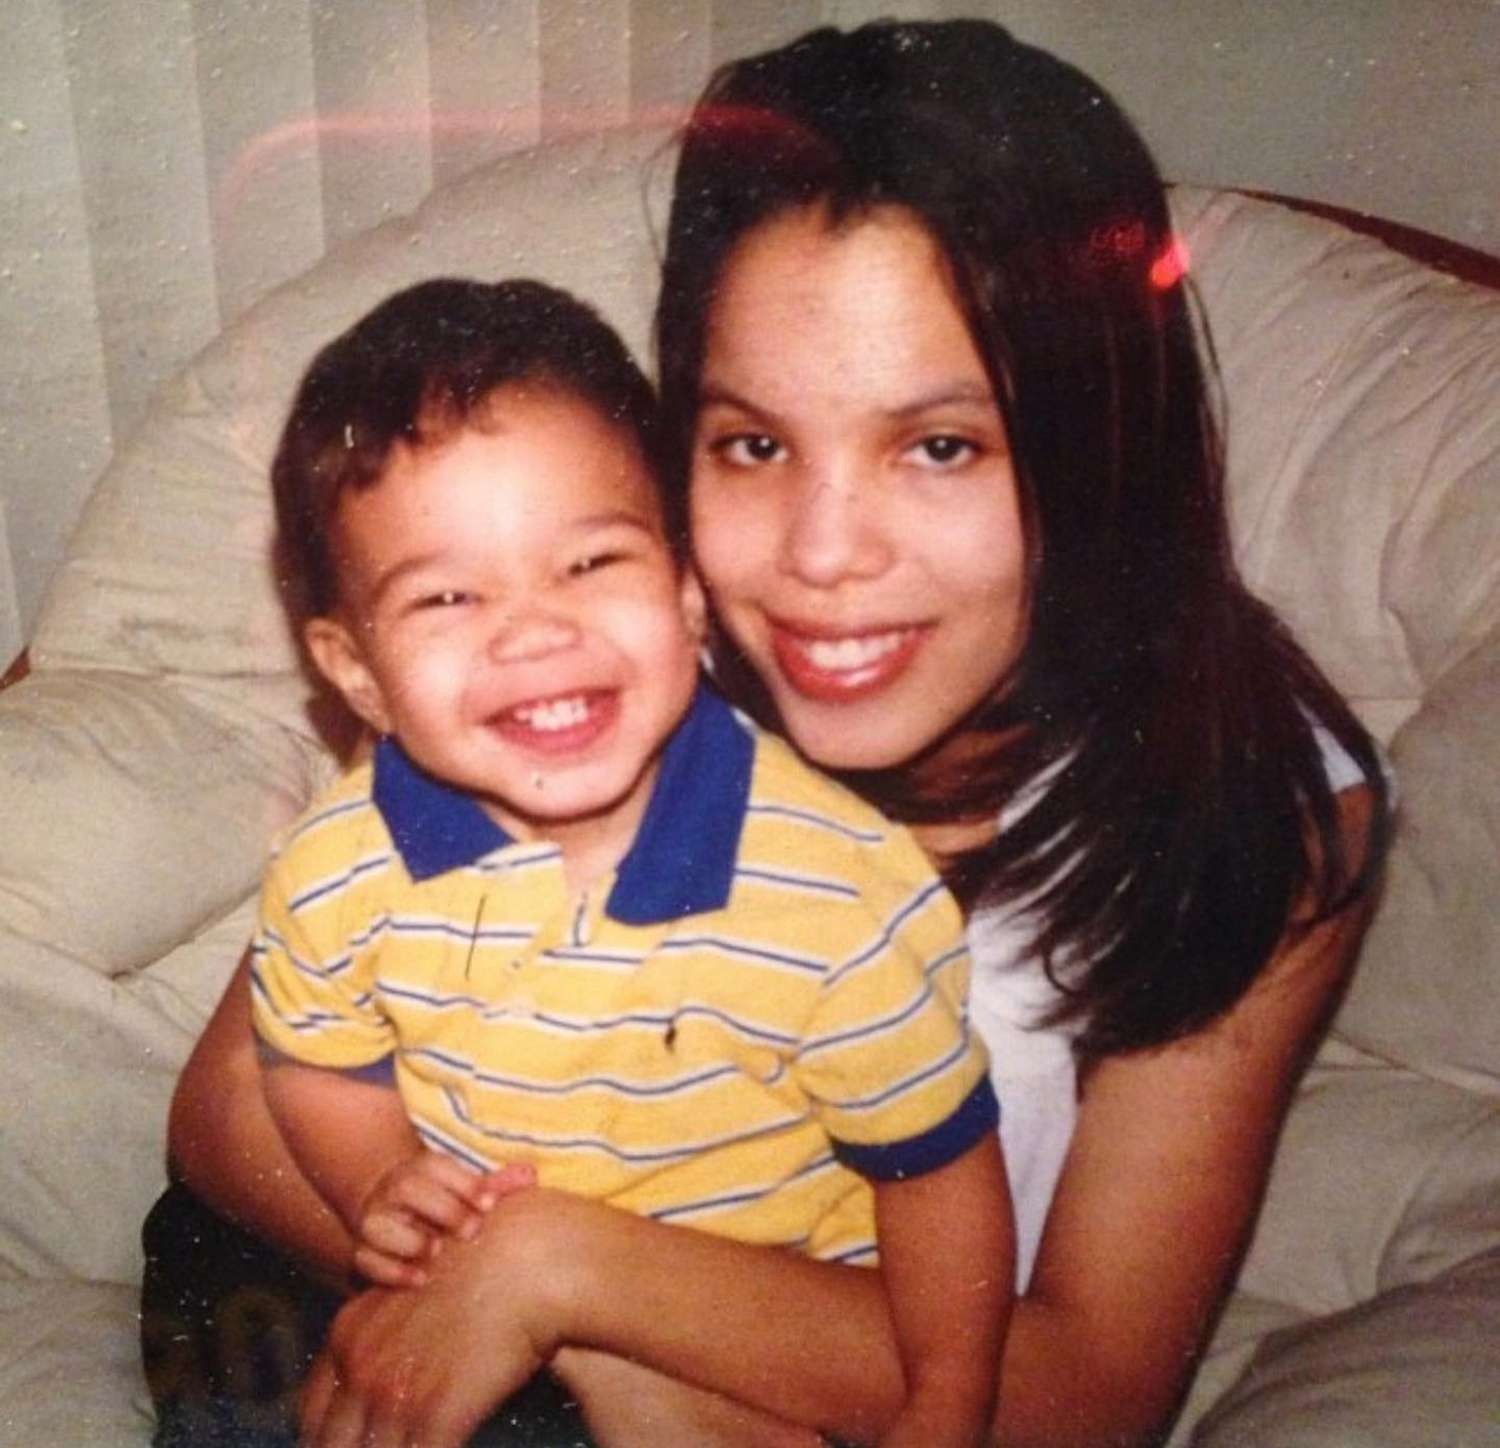 Jayson Tatum's parents birthed him at a young age